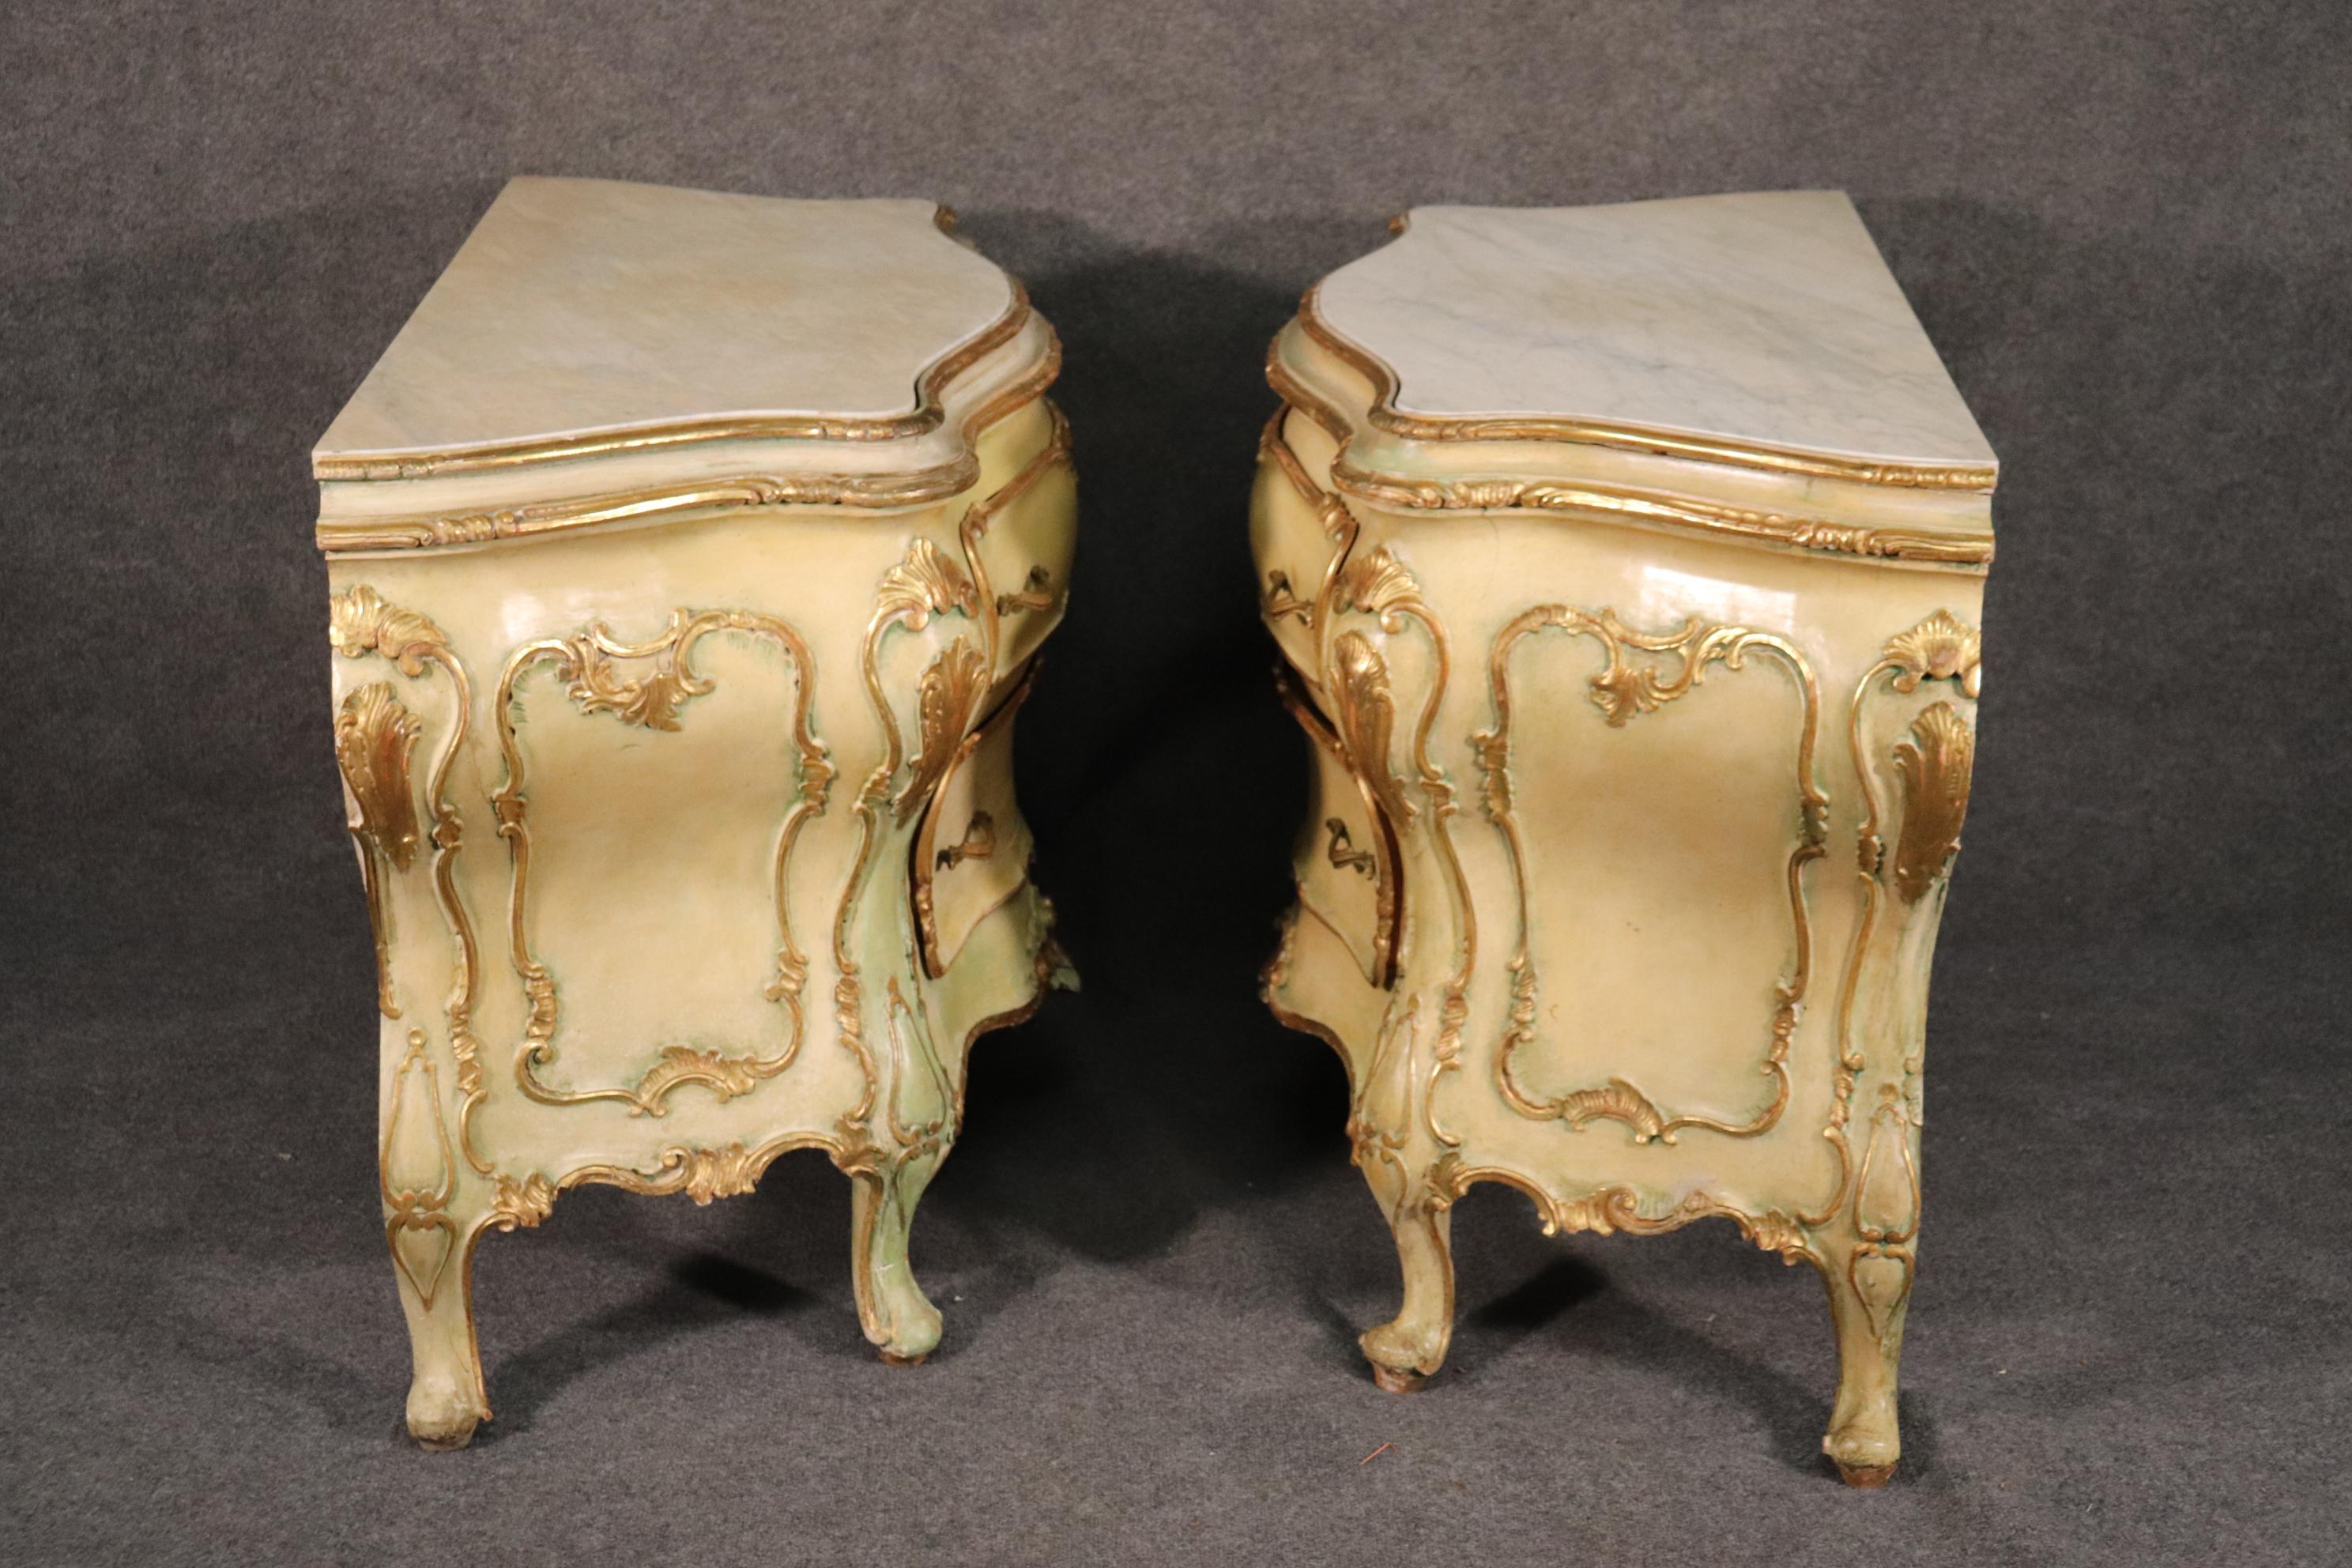 Rococo Revival Pair Fine Large Italian Painted Marble Top Rococo Commodes Dressers 1930s Era For Sale